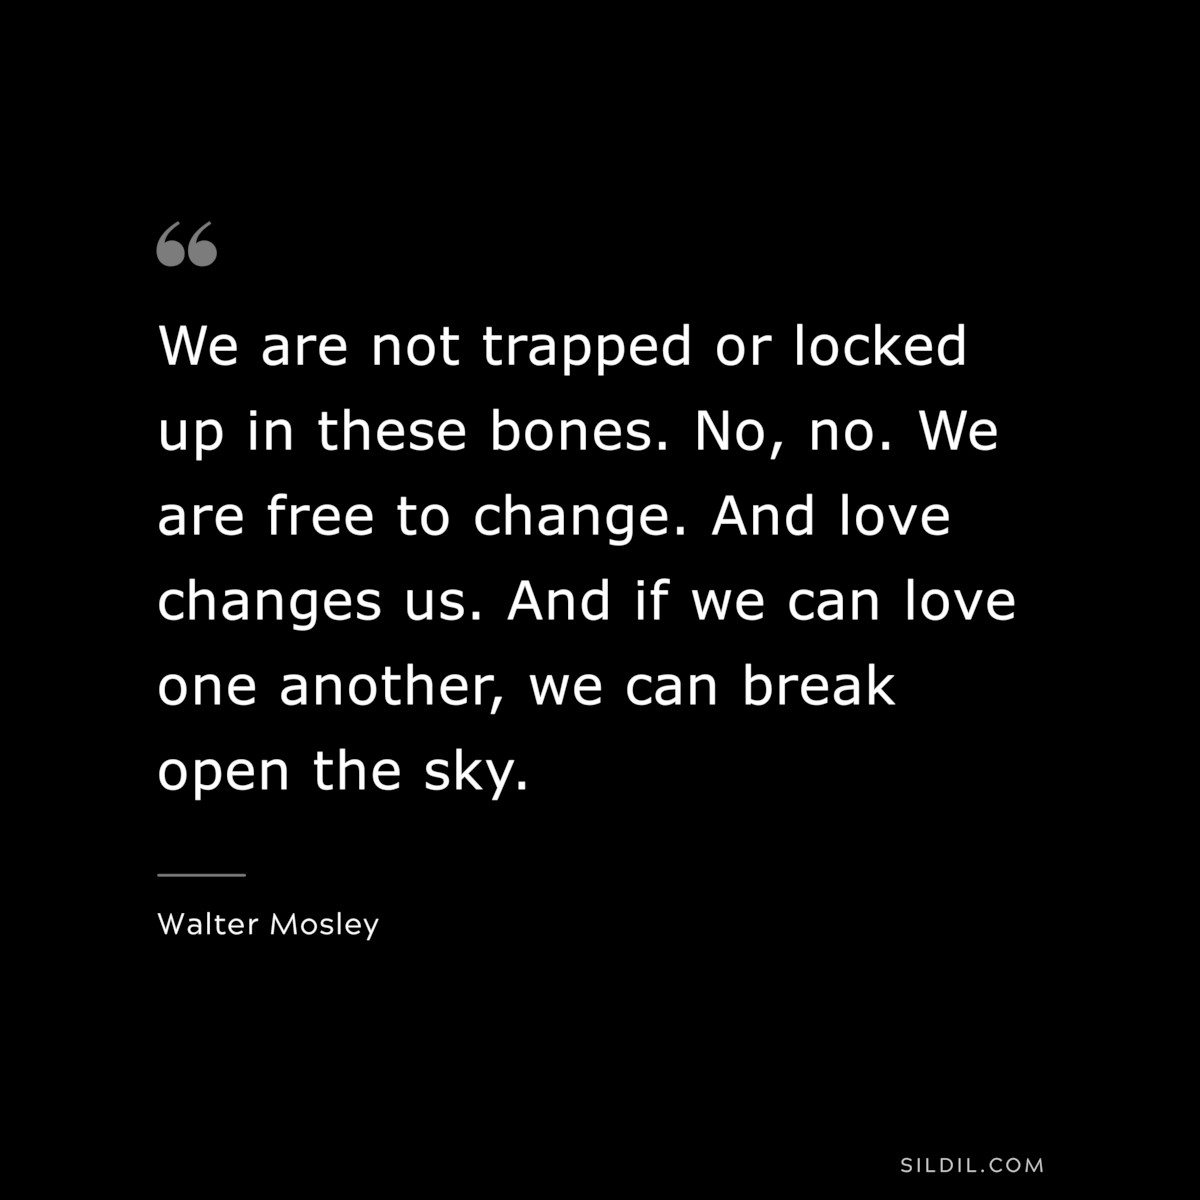 We are not trapped or locked up in these bones. No, no. We are free to change. And love changes us. And if we can love one another, we can break open the sky. ― Walter Mosley